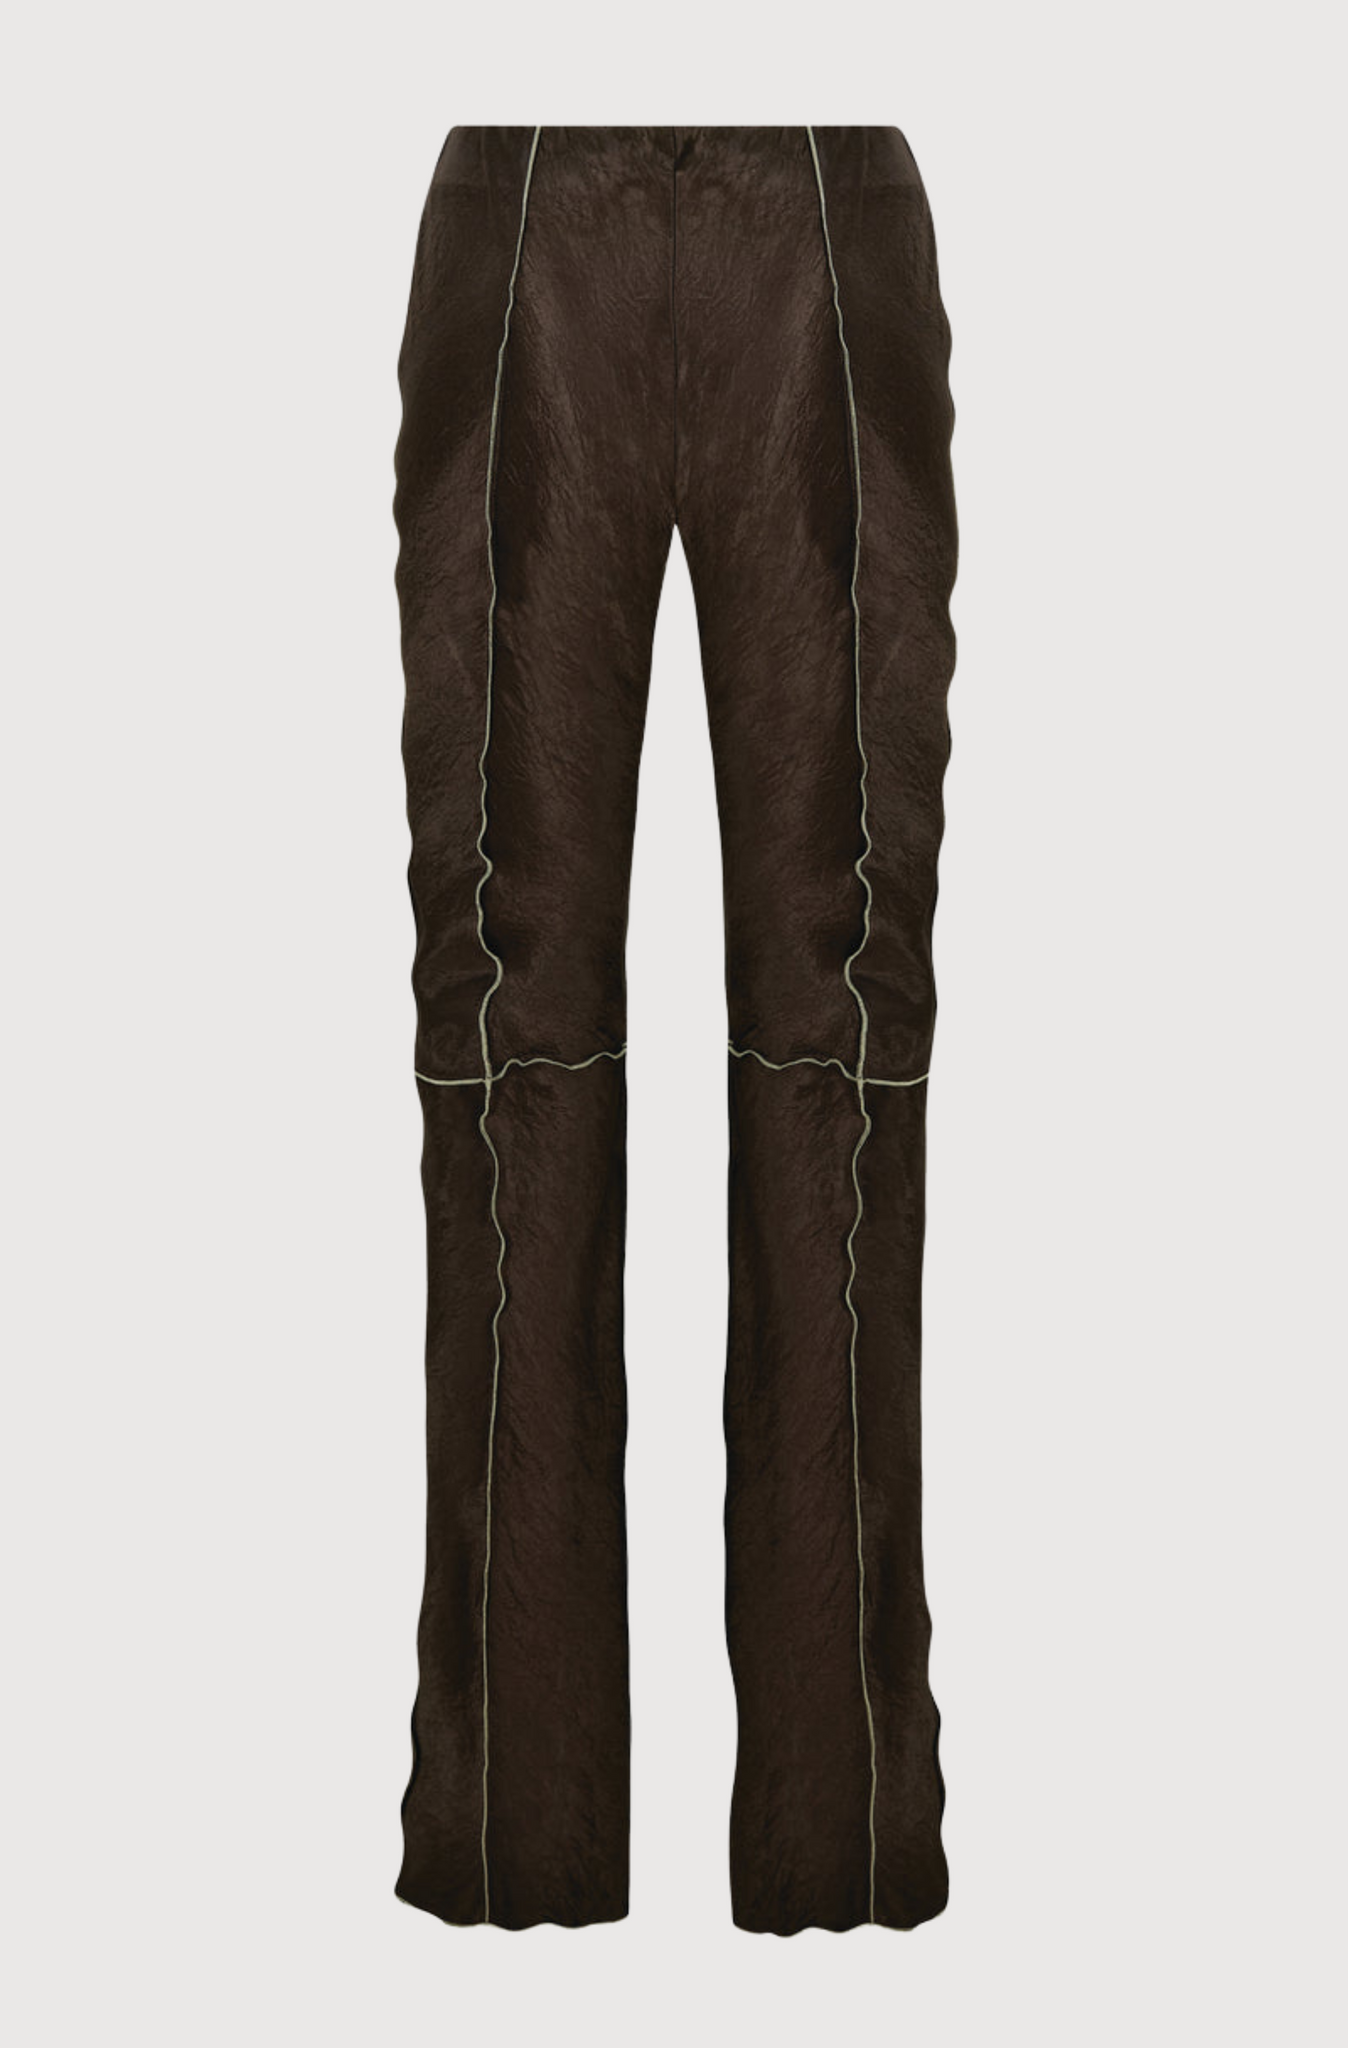 CURLY FRONT SPLIT TROUSERS - CHOCOLATE